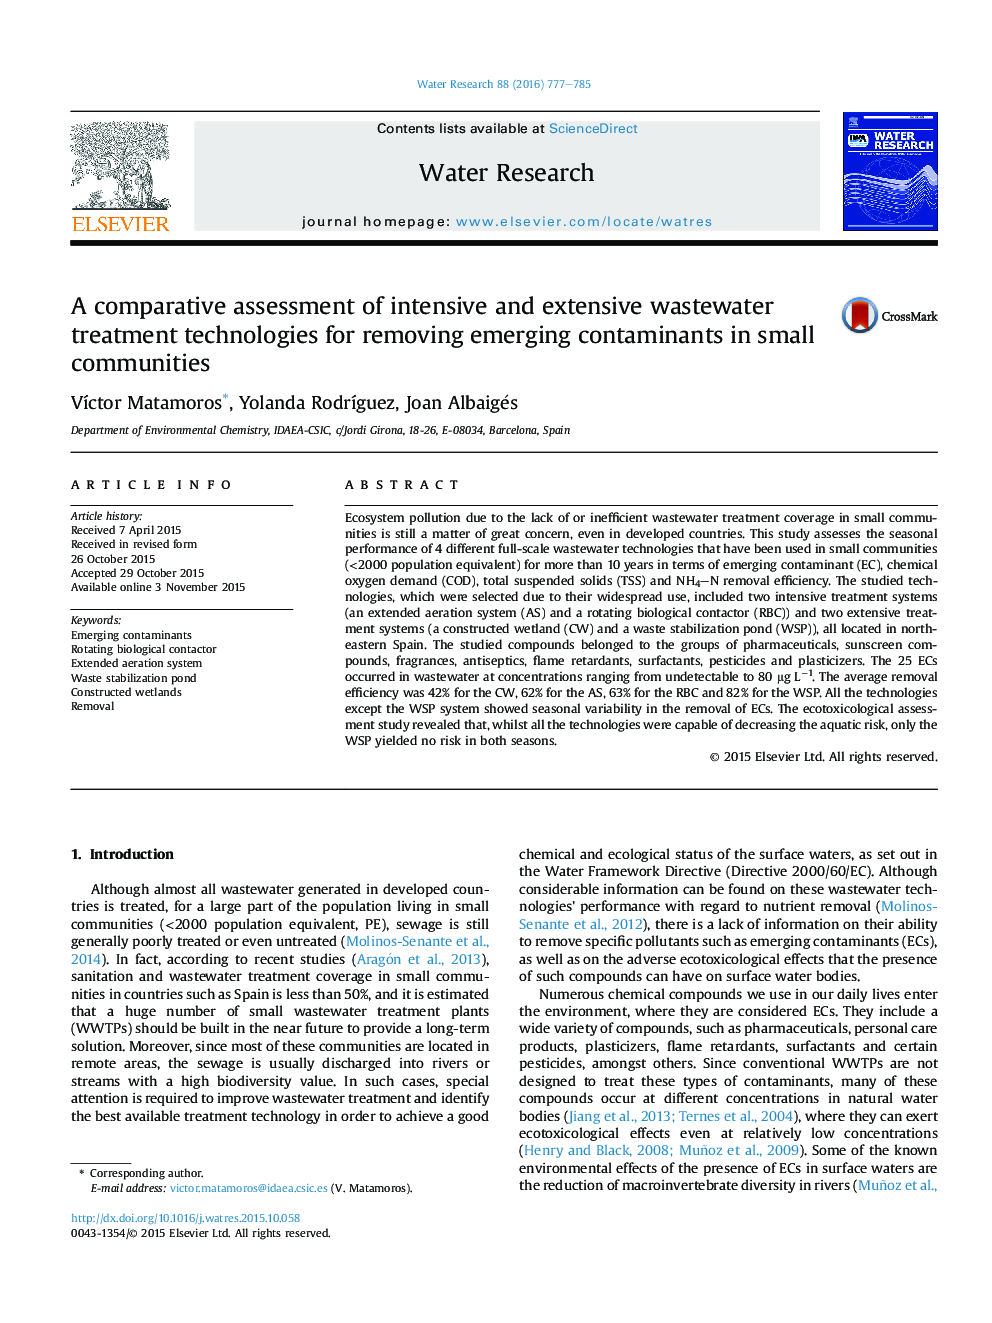 A comparative assessment of intensive and extensive wastewater treatment technologies for removing emerging contaminants in small communities